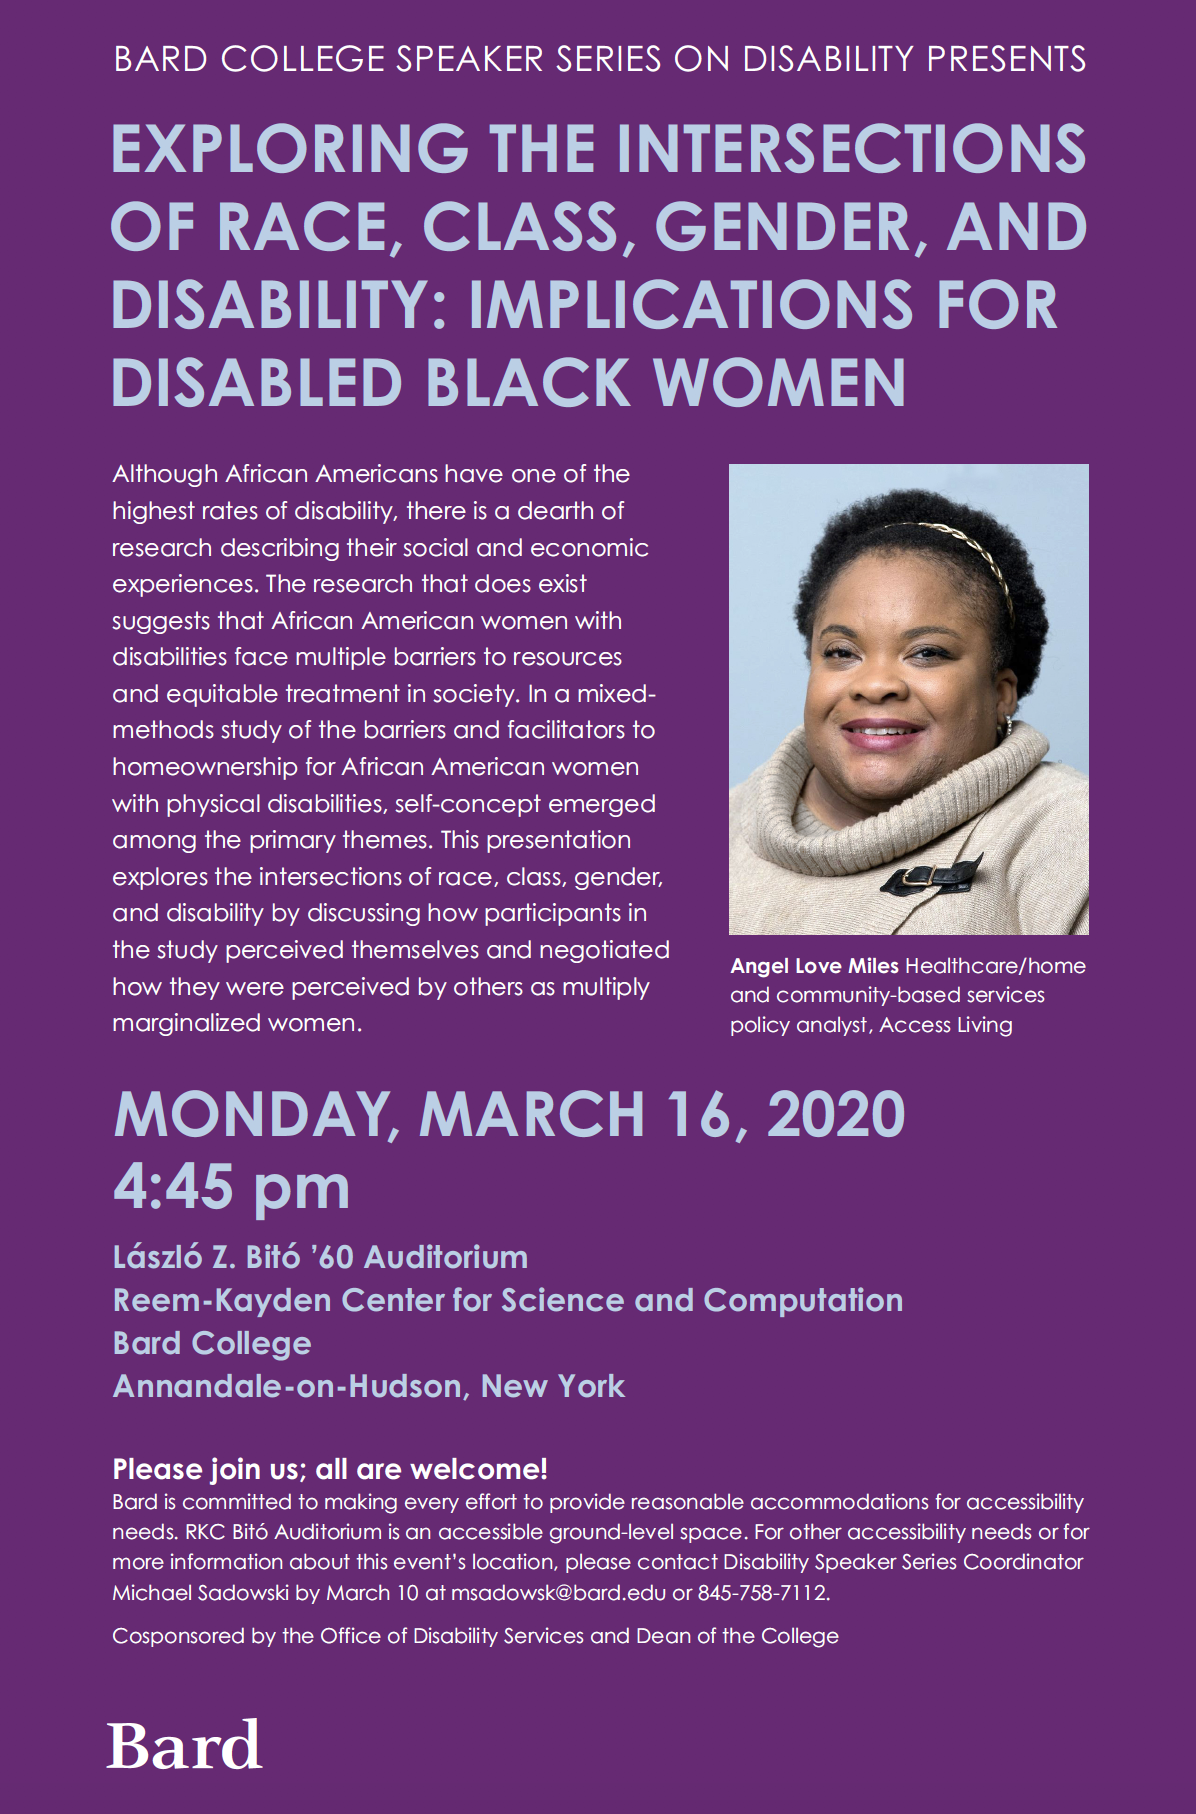 CANCELED: Speaker Series on Disability: Exploring the Intersections of Race, Class, Gender, and Disability:&nbsp;Implications for Disabled&nbsp;Black Women